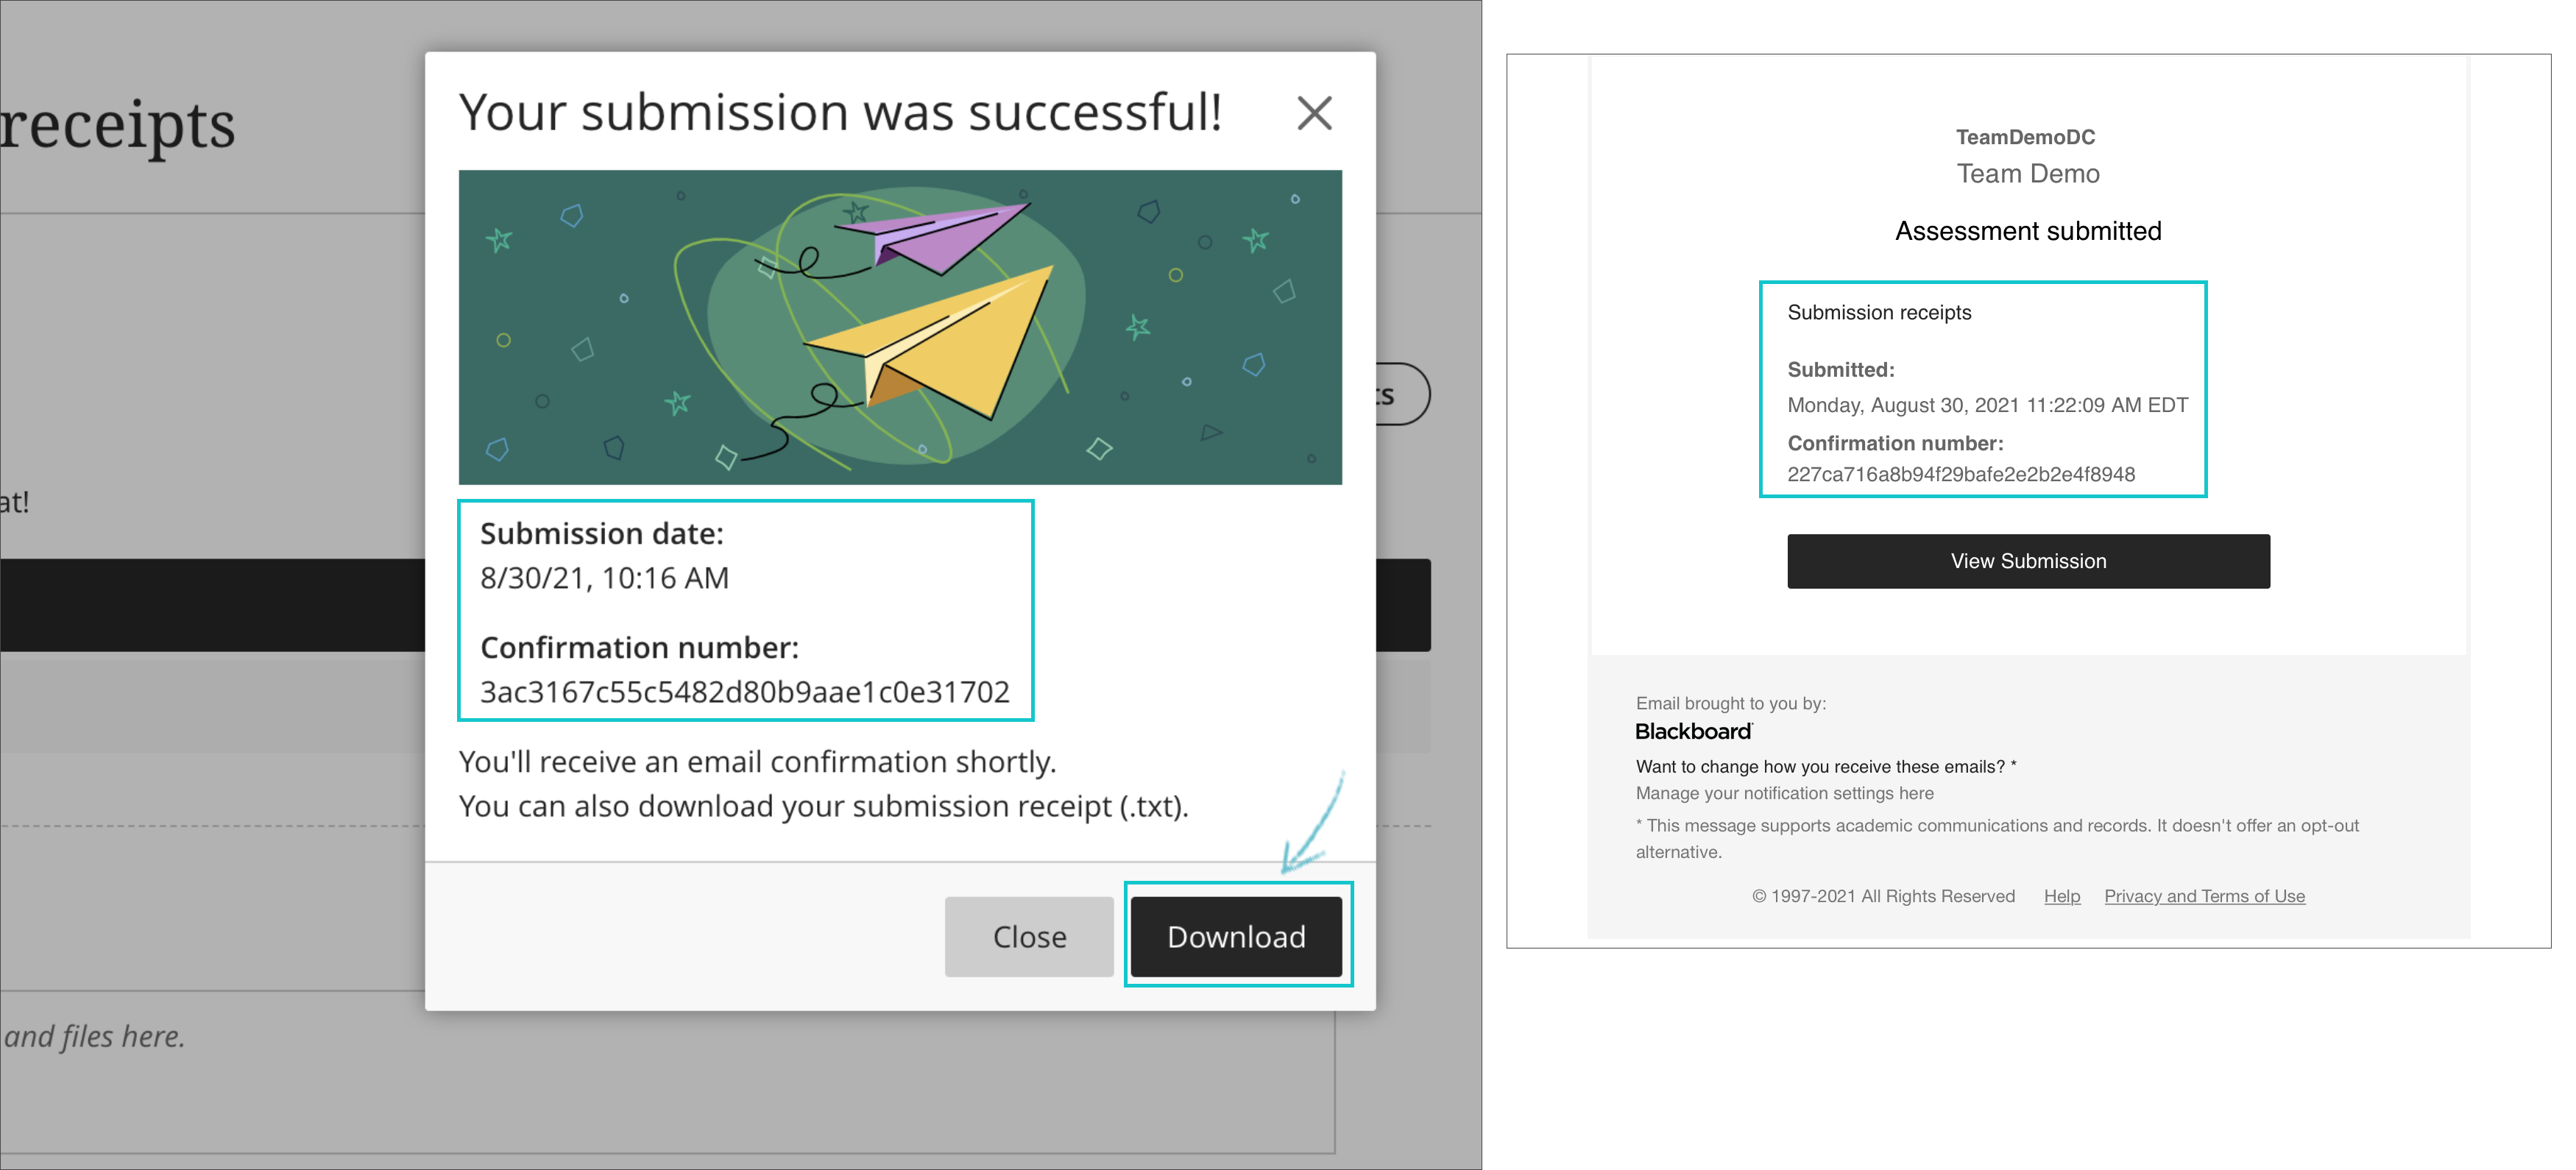 when students submit an assignment or test, a pop-up window will appear to confirm the submission was successful and provide a unique confirmation number. This information can be downloaded by clicking the "Download" button